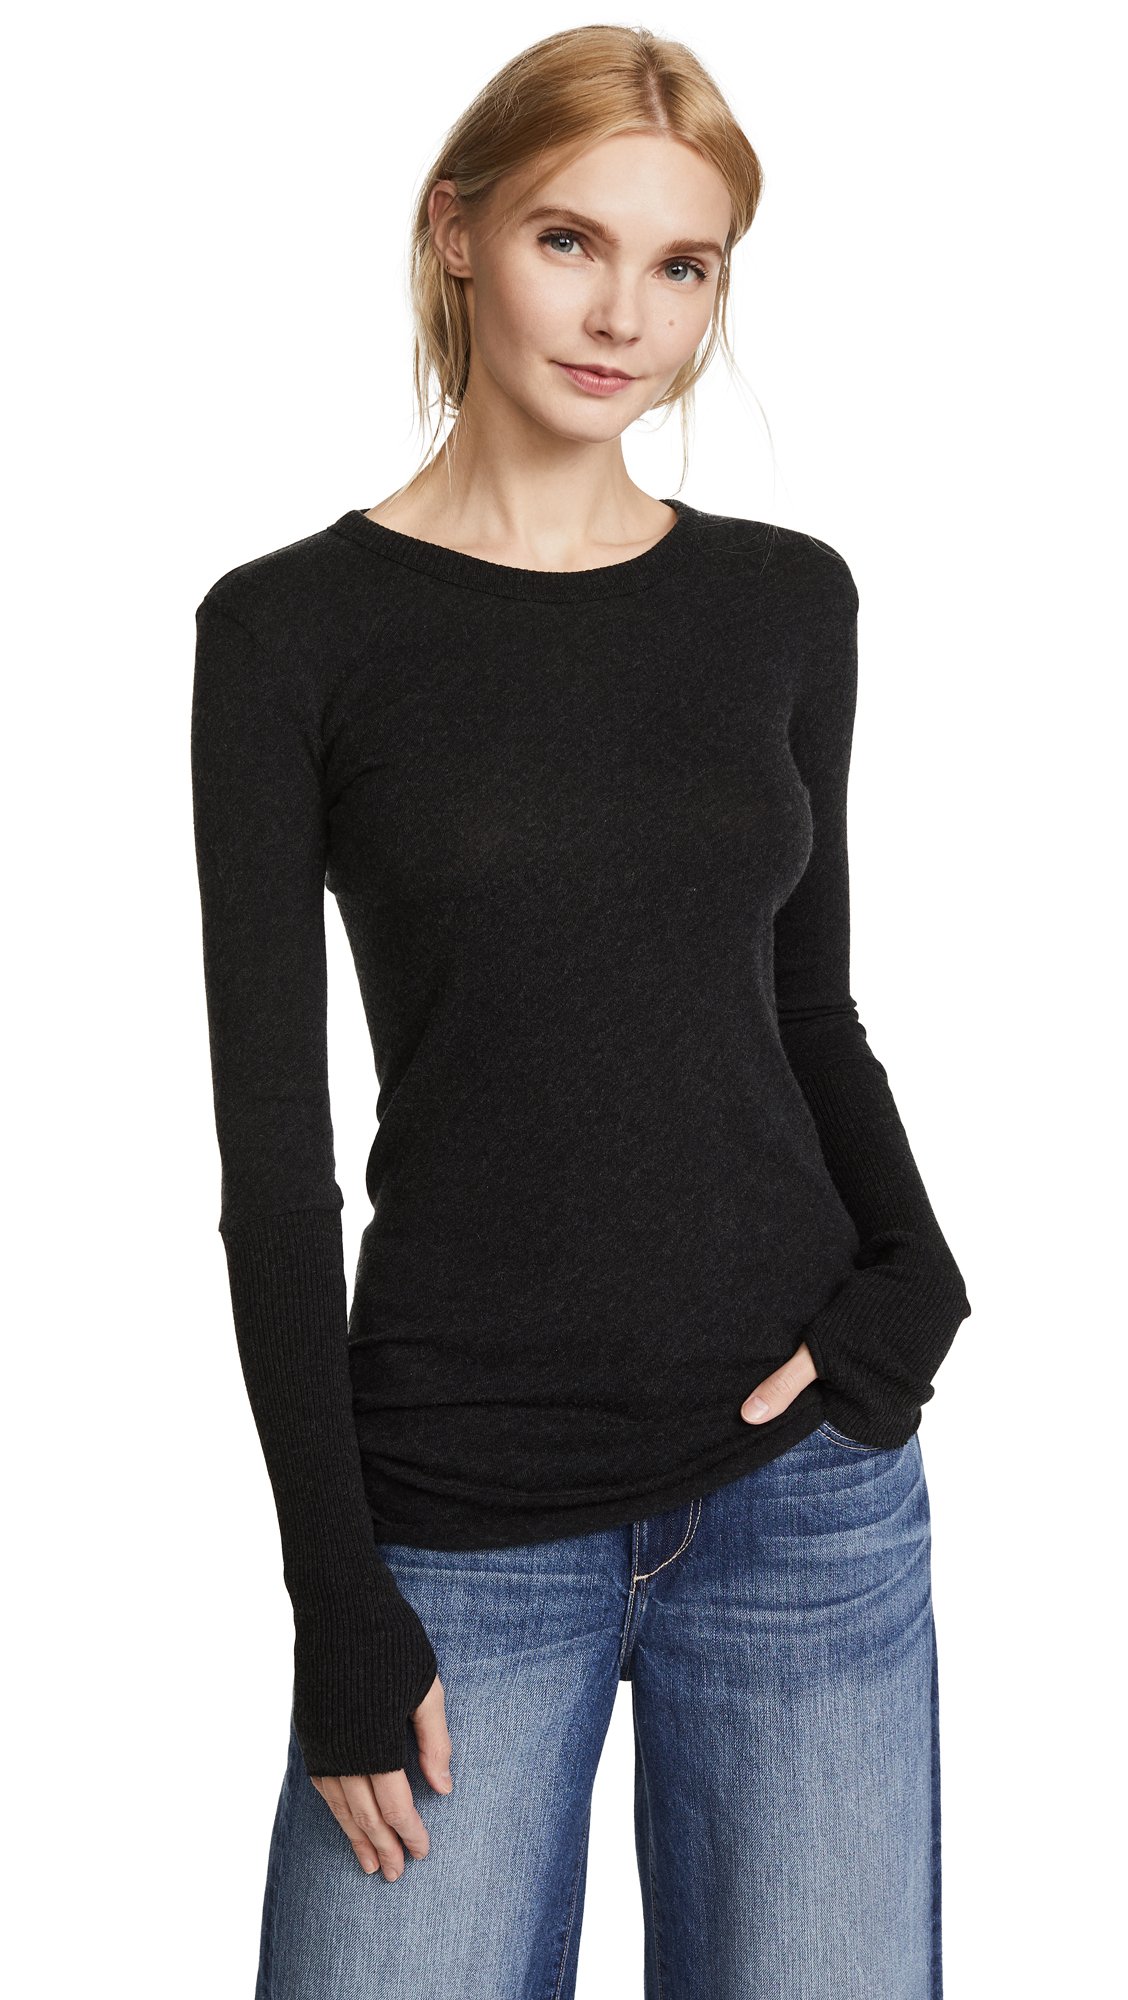 Enza Costa Women’s Cashmere Blend Cuffed Crew Top with Thumbholes